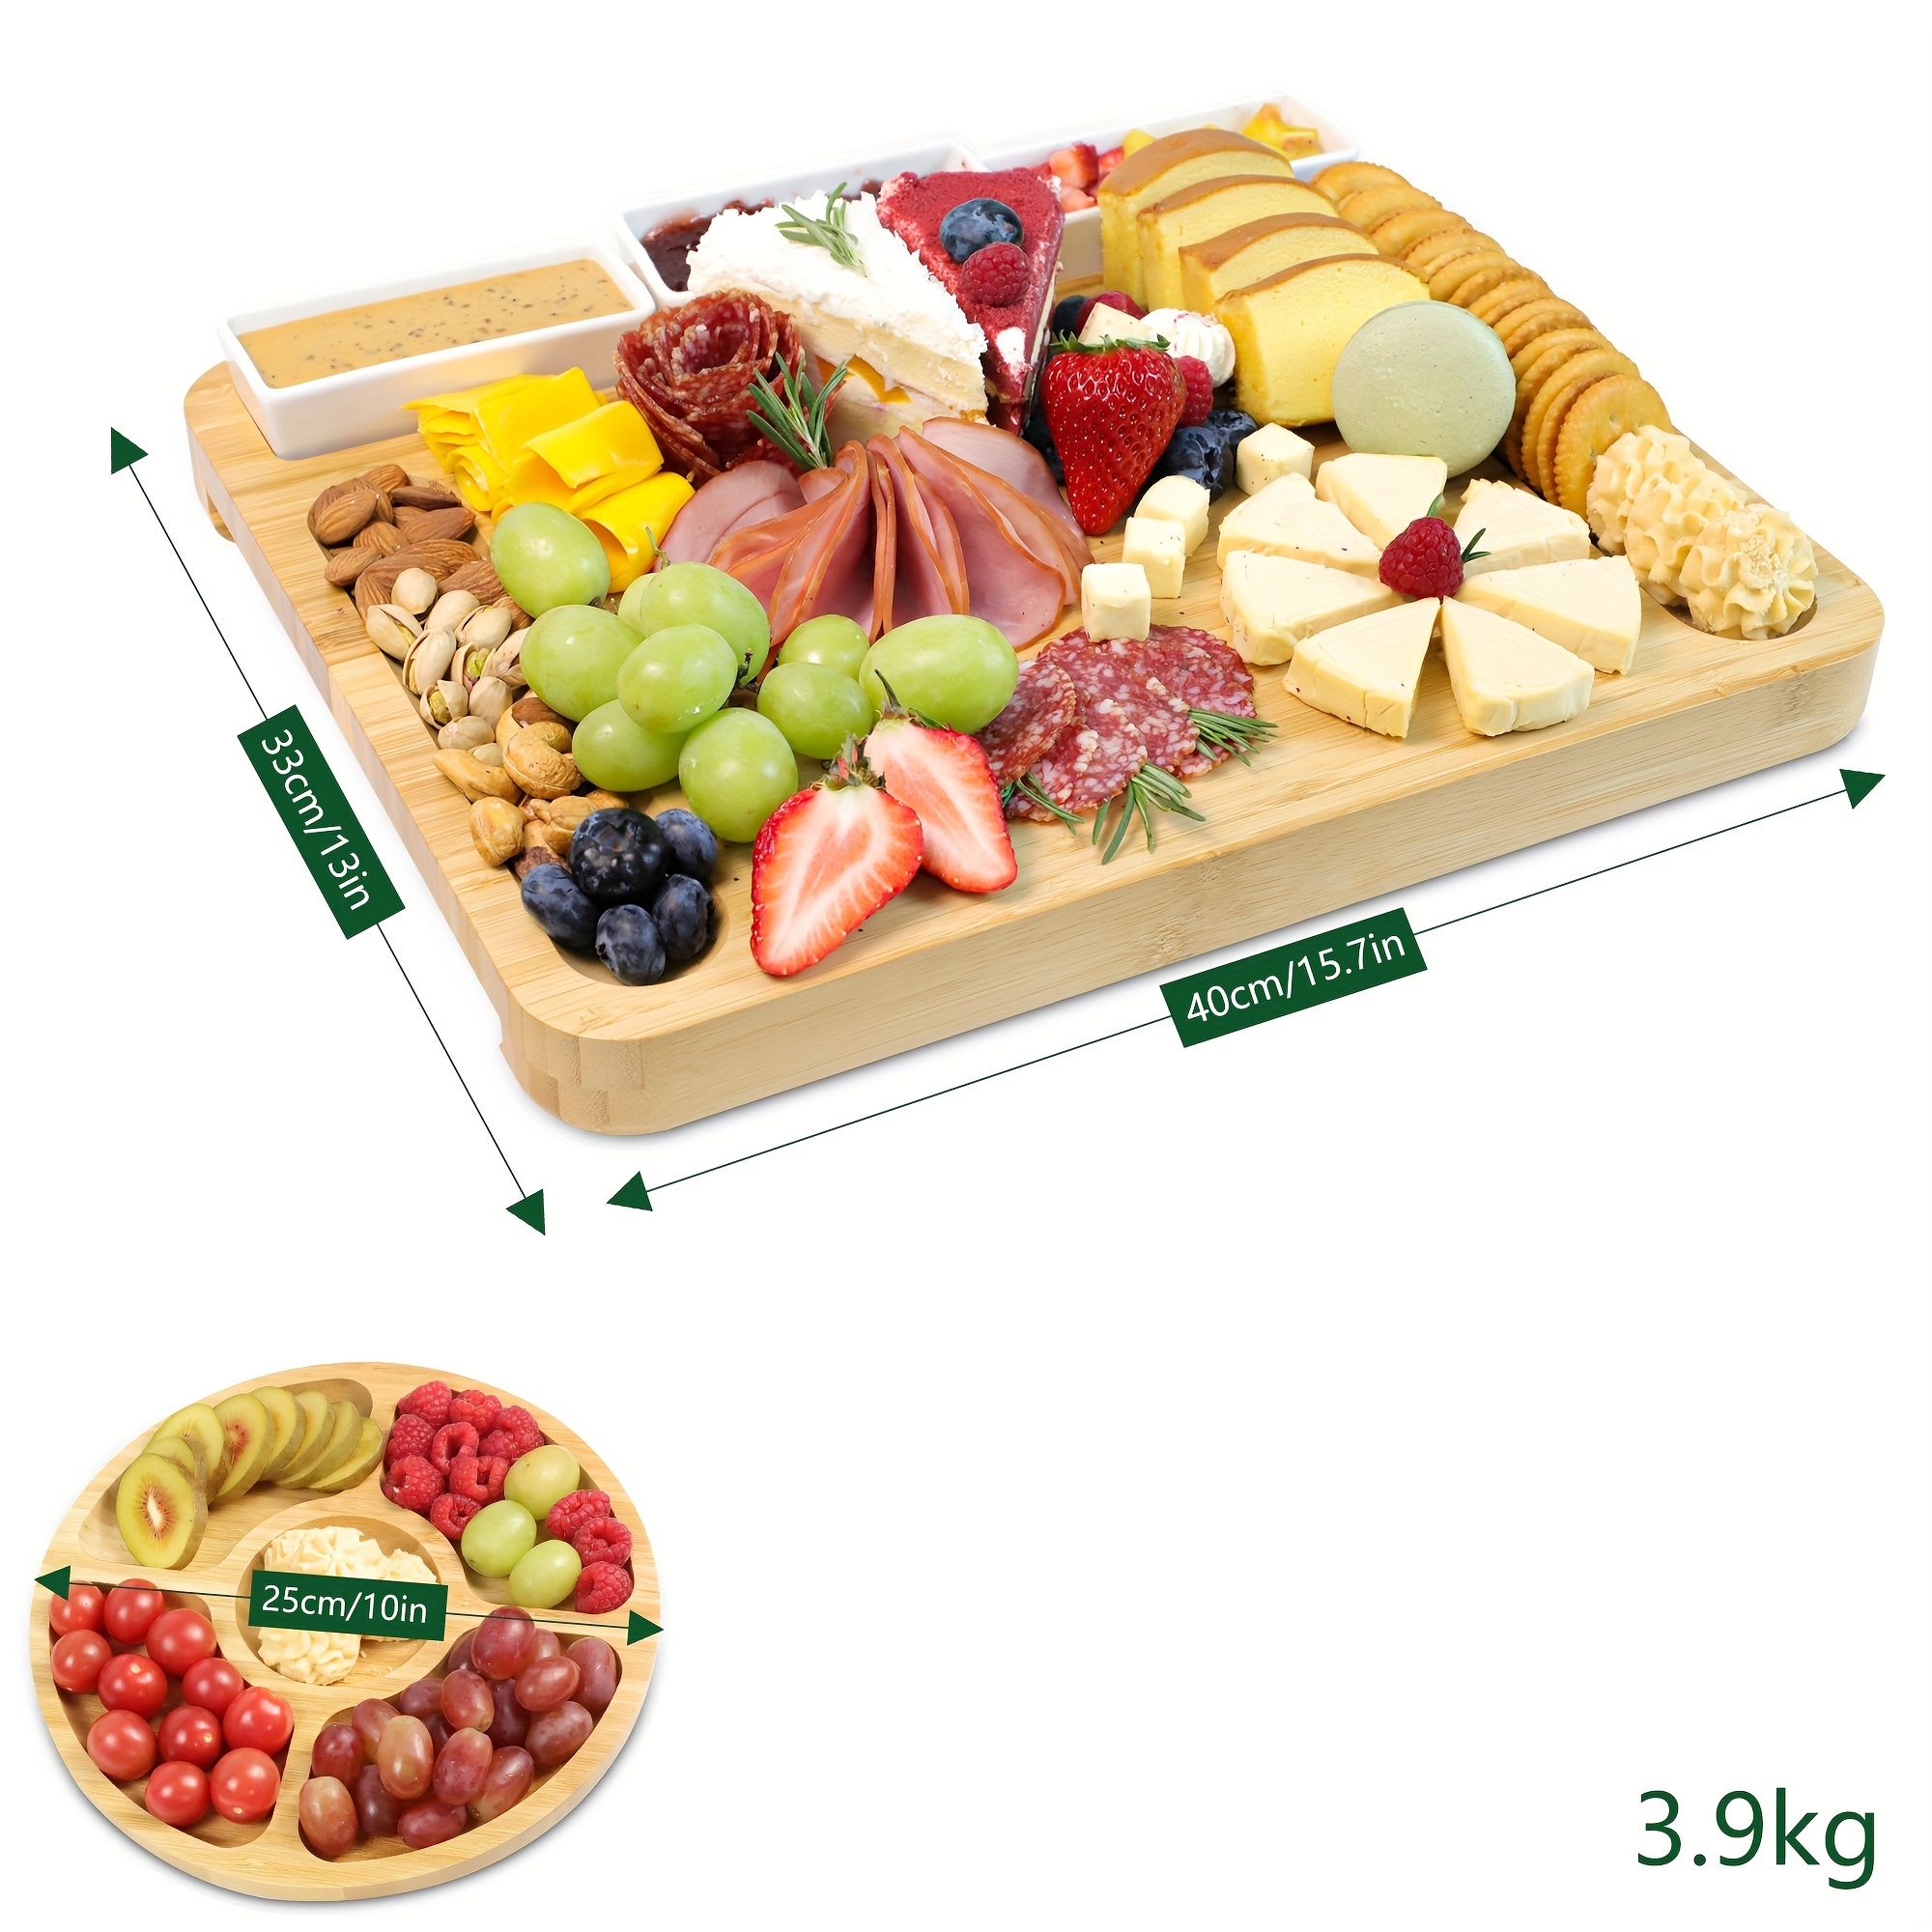  3 Piece Bon Appetit Bamboo Cutting Board and Knife Set -  Chopping Board, Mini Charcuterie Board for Meat, Fruit and Cheese Board by  - (White): Home & Kitchen